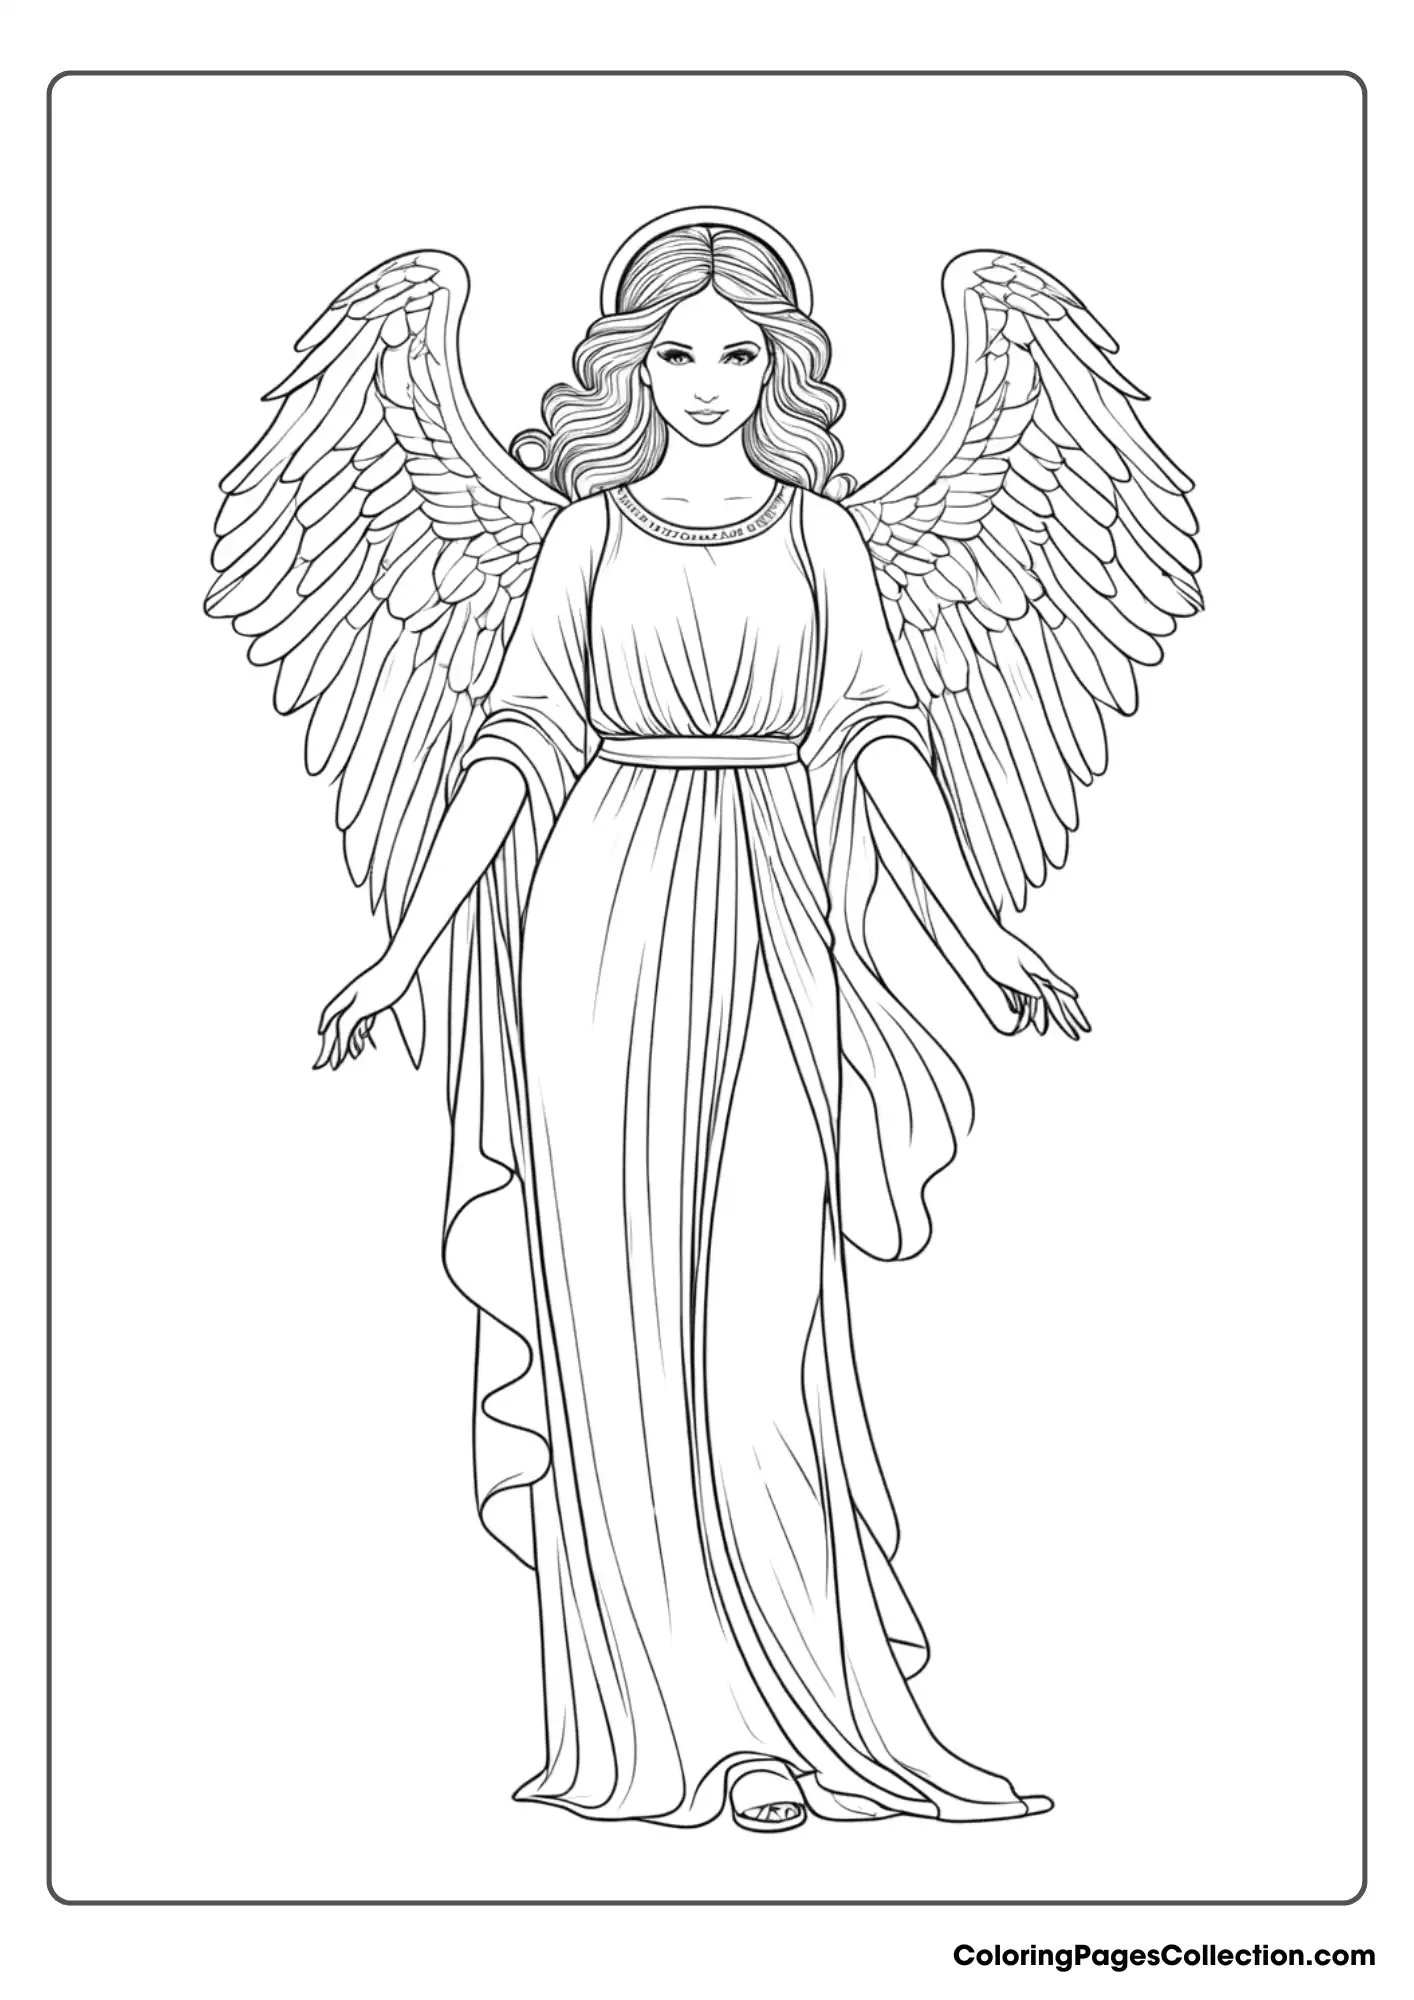 Coloring pages for teens, Angel